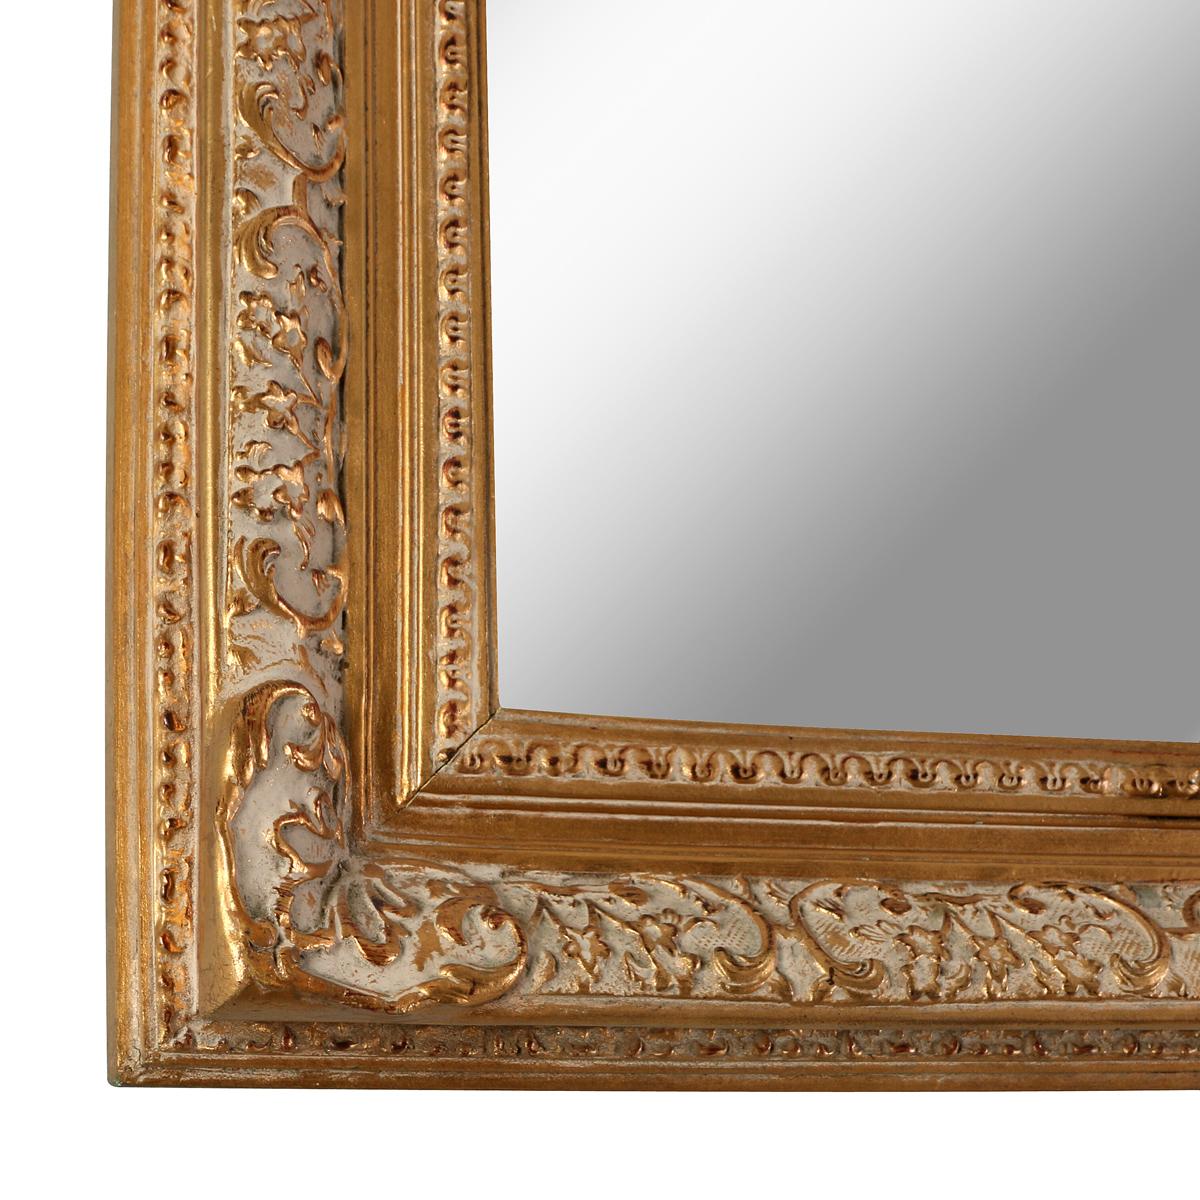 A giltwood mirror with lovely carved decorations between and inner and outer beaded molding..  The inner carved frame is only partially gold, revealing the lower base paint that is applied before leafing. This gives the mirror some visual interest